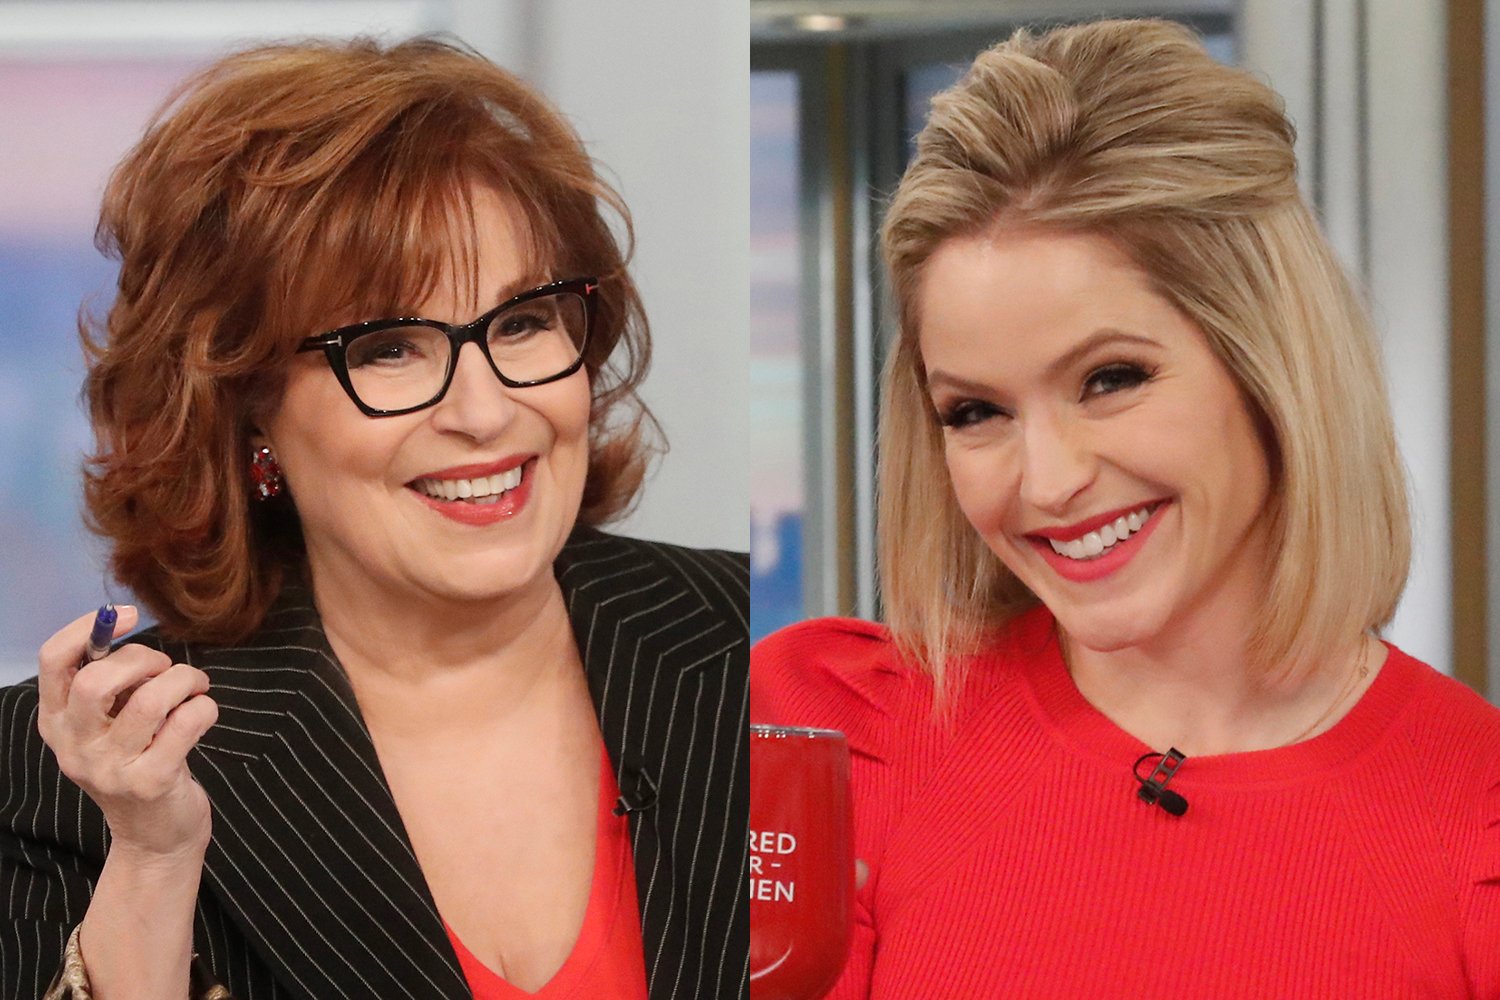 Joy Behar smiling, wearing black glass frames and a black blazer with red blouse. Sara Haines smiling wearing a red top.